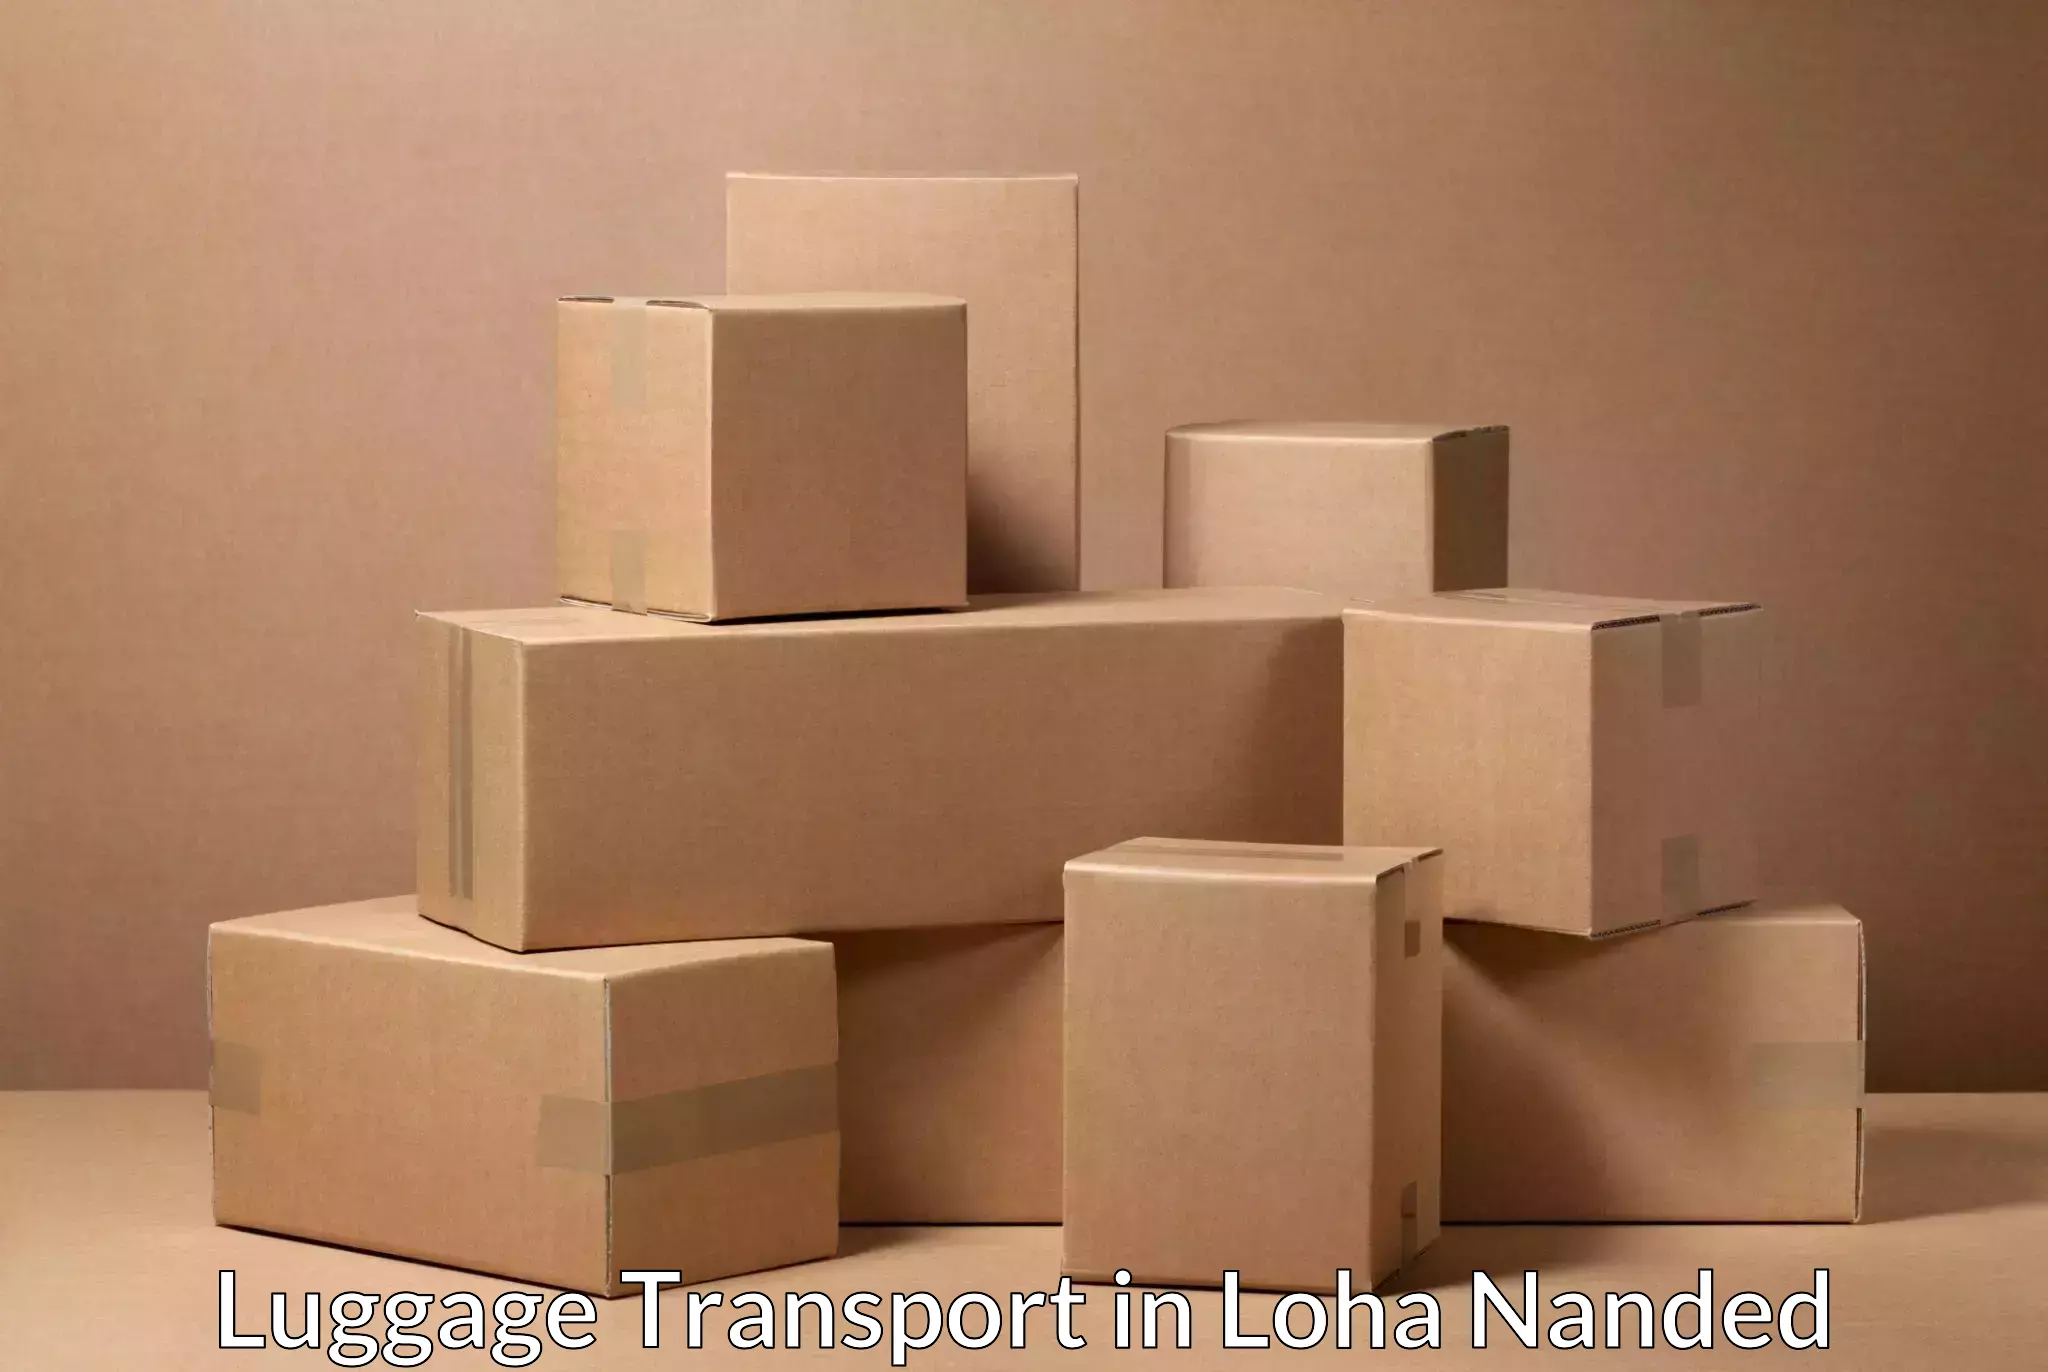 Urgent luggage shipment in Loha Nanded